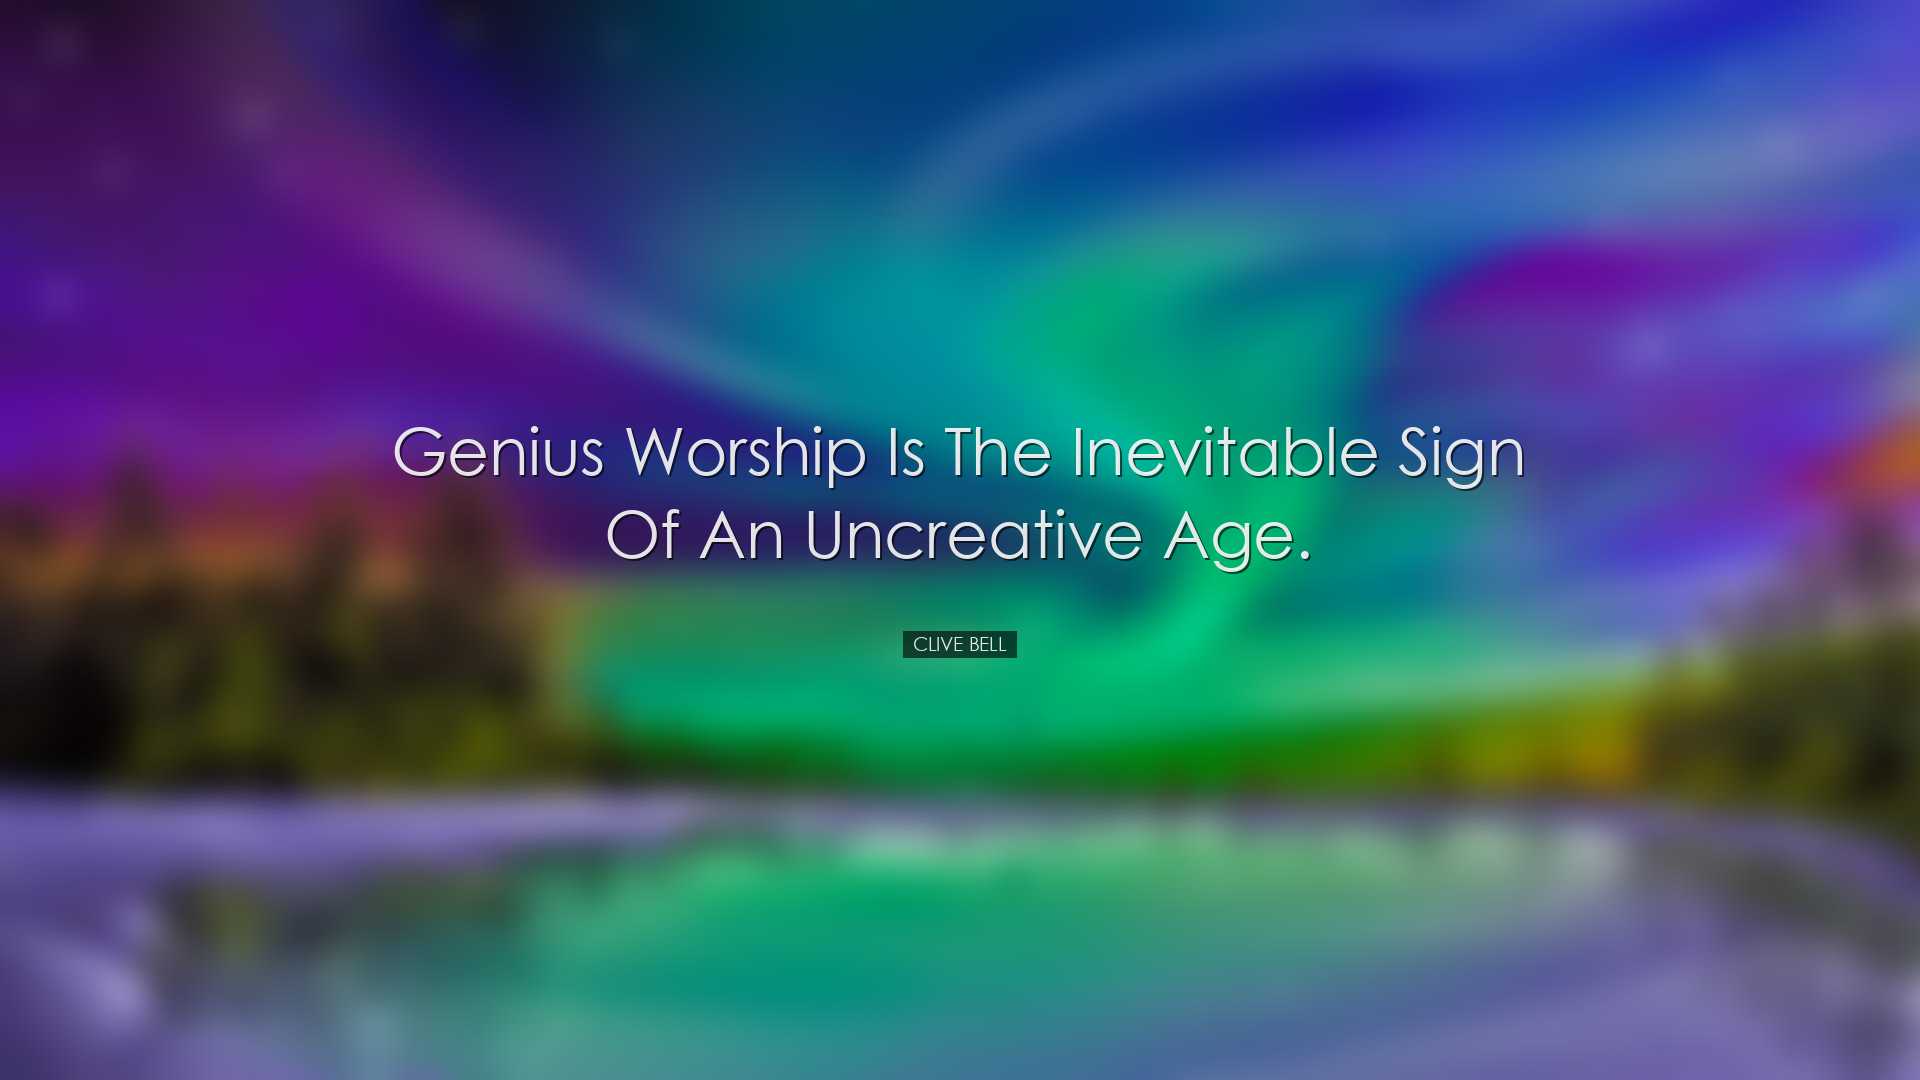 Genius worship is the inevitable sign of an uncreative age. - Cliv